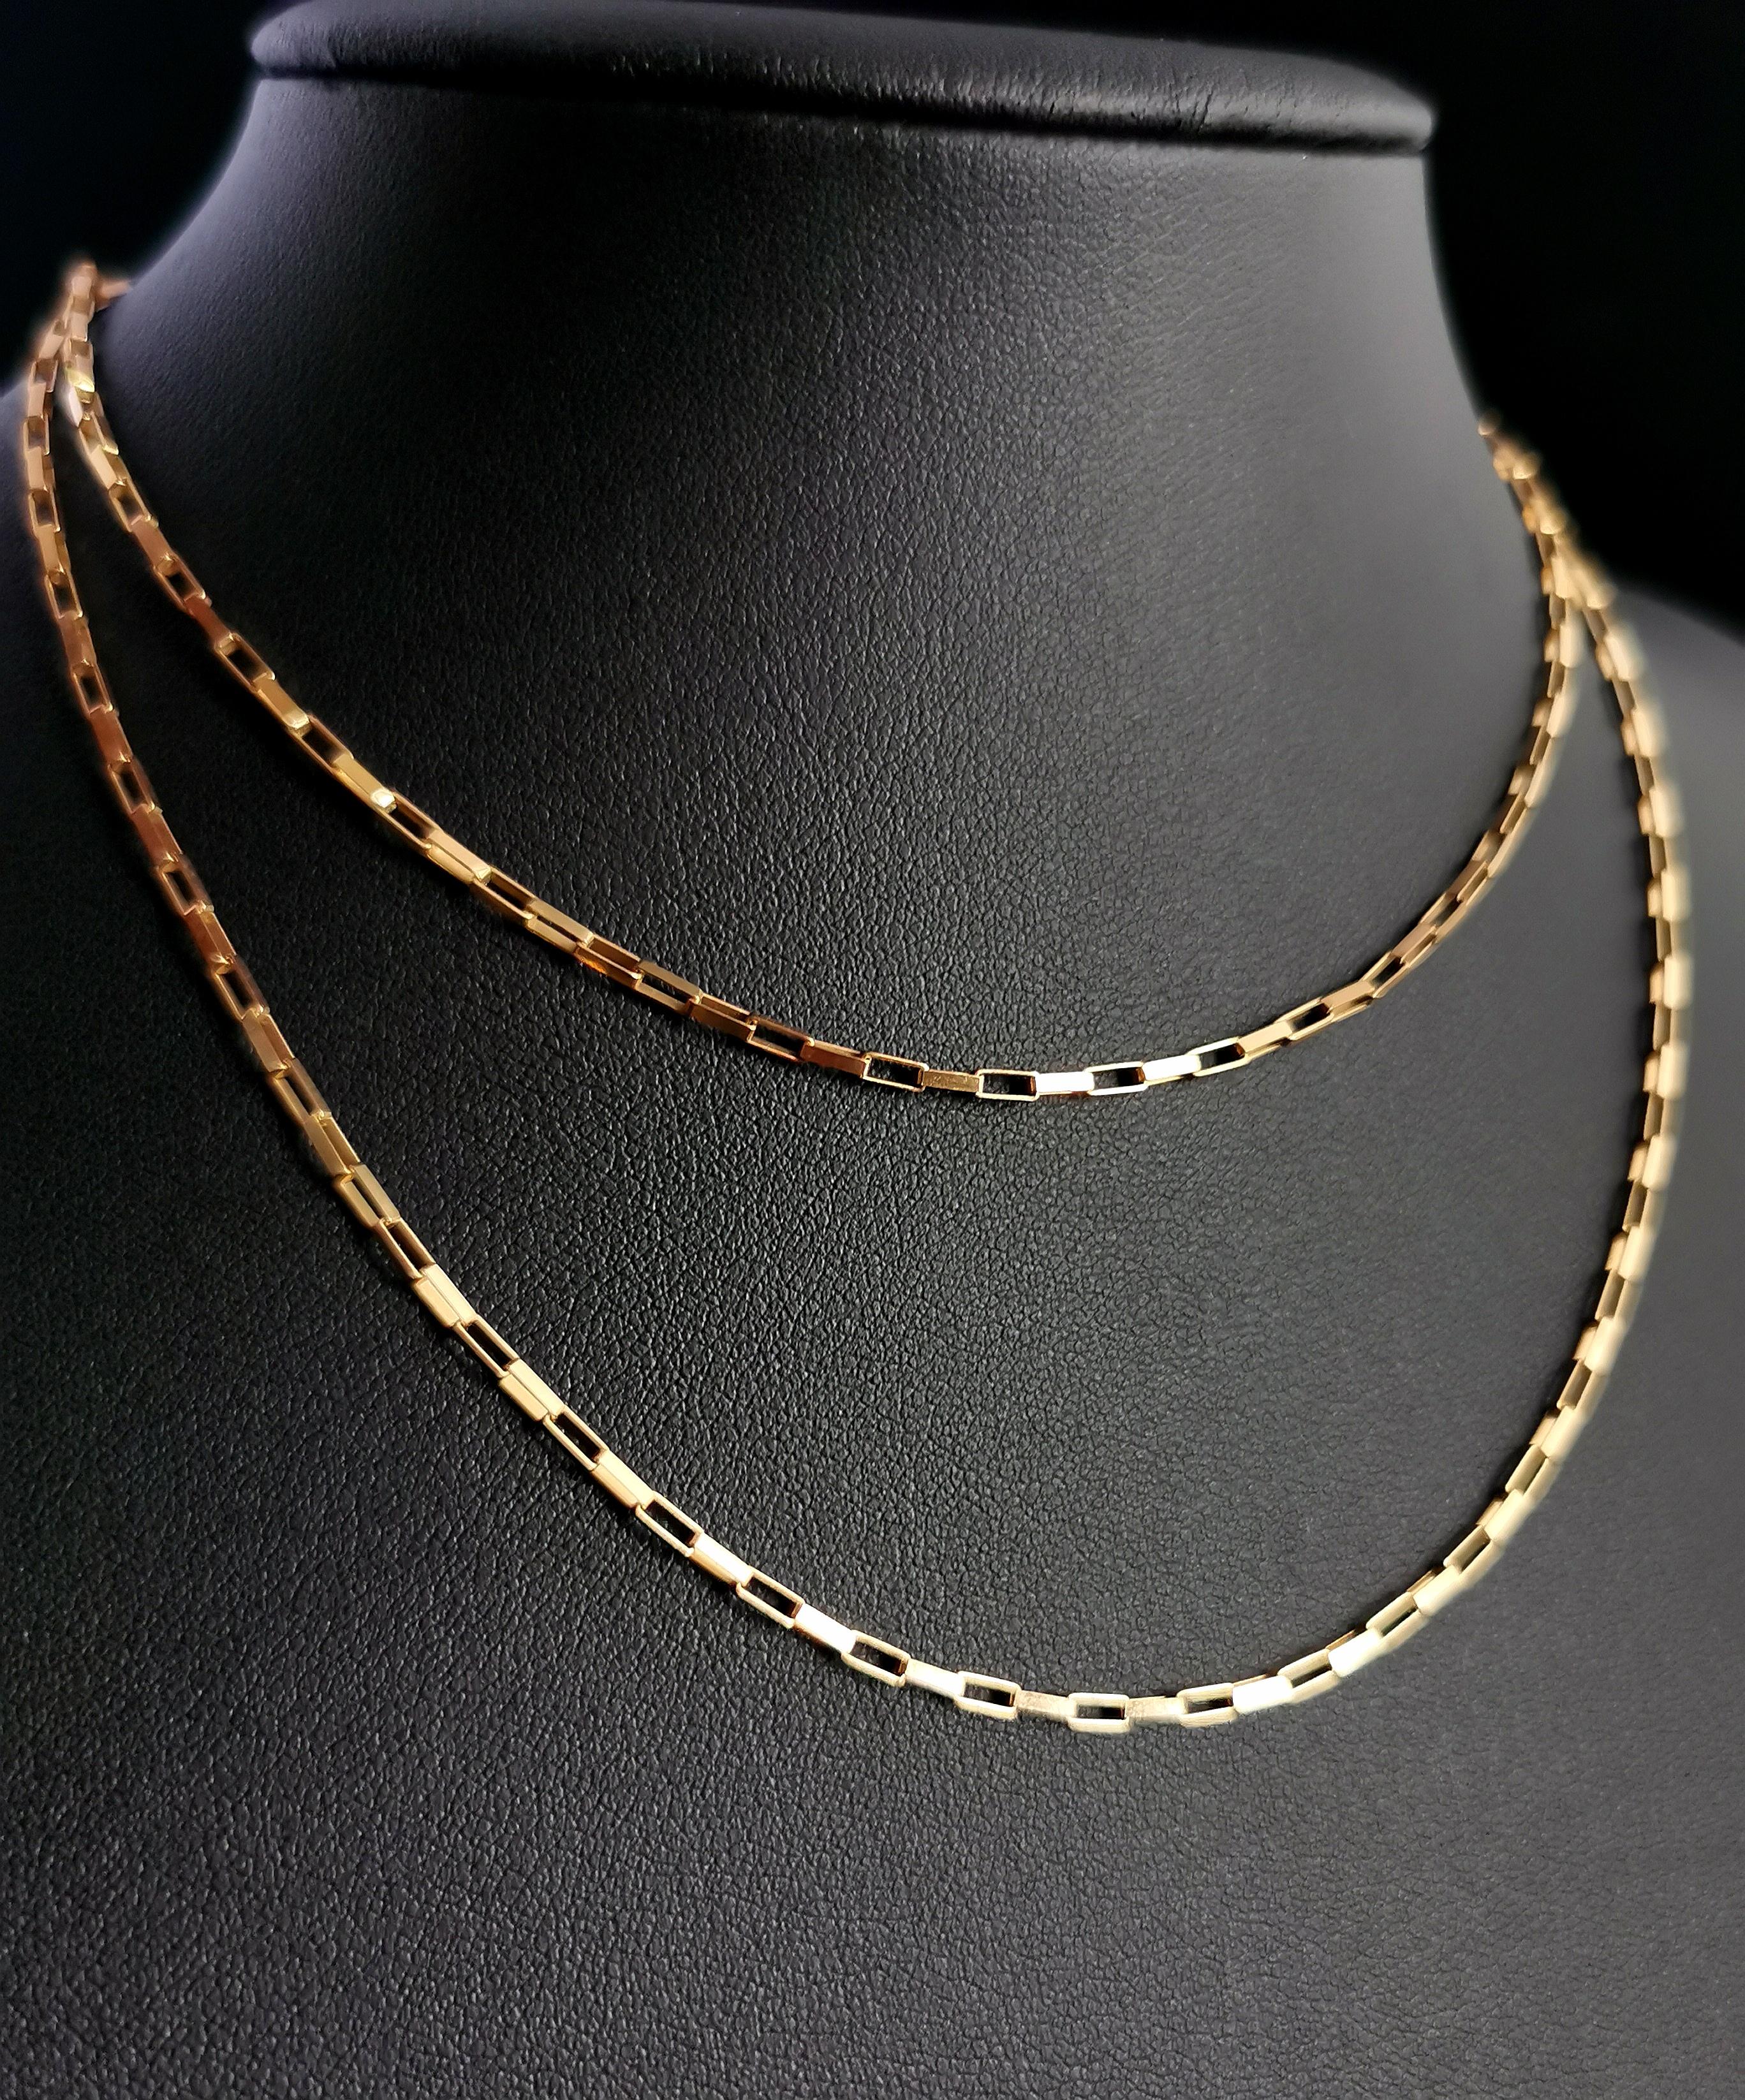 A gorgeous vintage 9 karat yellow gold chain necklace.

It has boxy rectangular belcher style links which give it lots of shimmer when moved.

It is a great length perfect for your favourite lockets and pendants.

It has a spring ring clasp